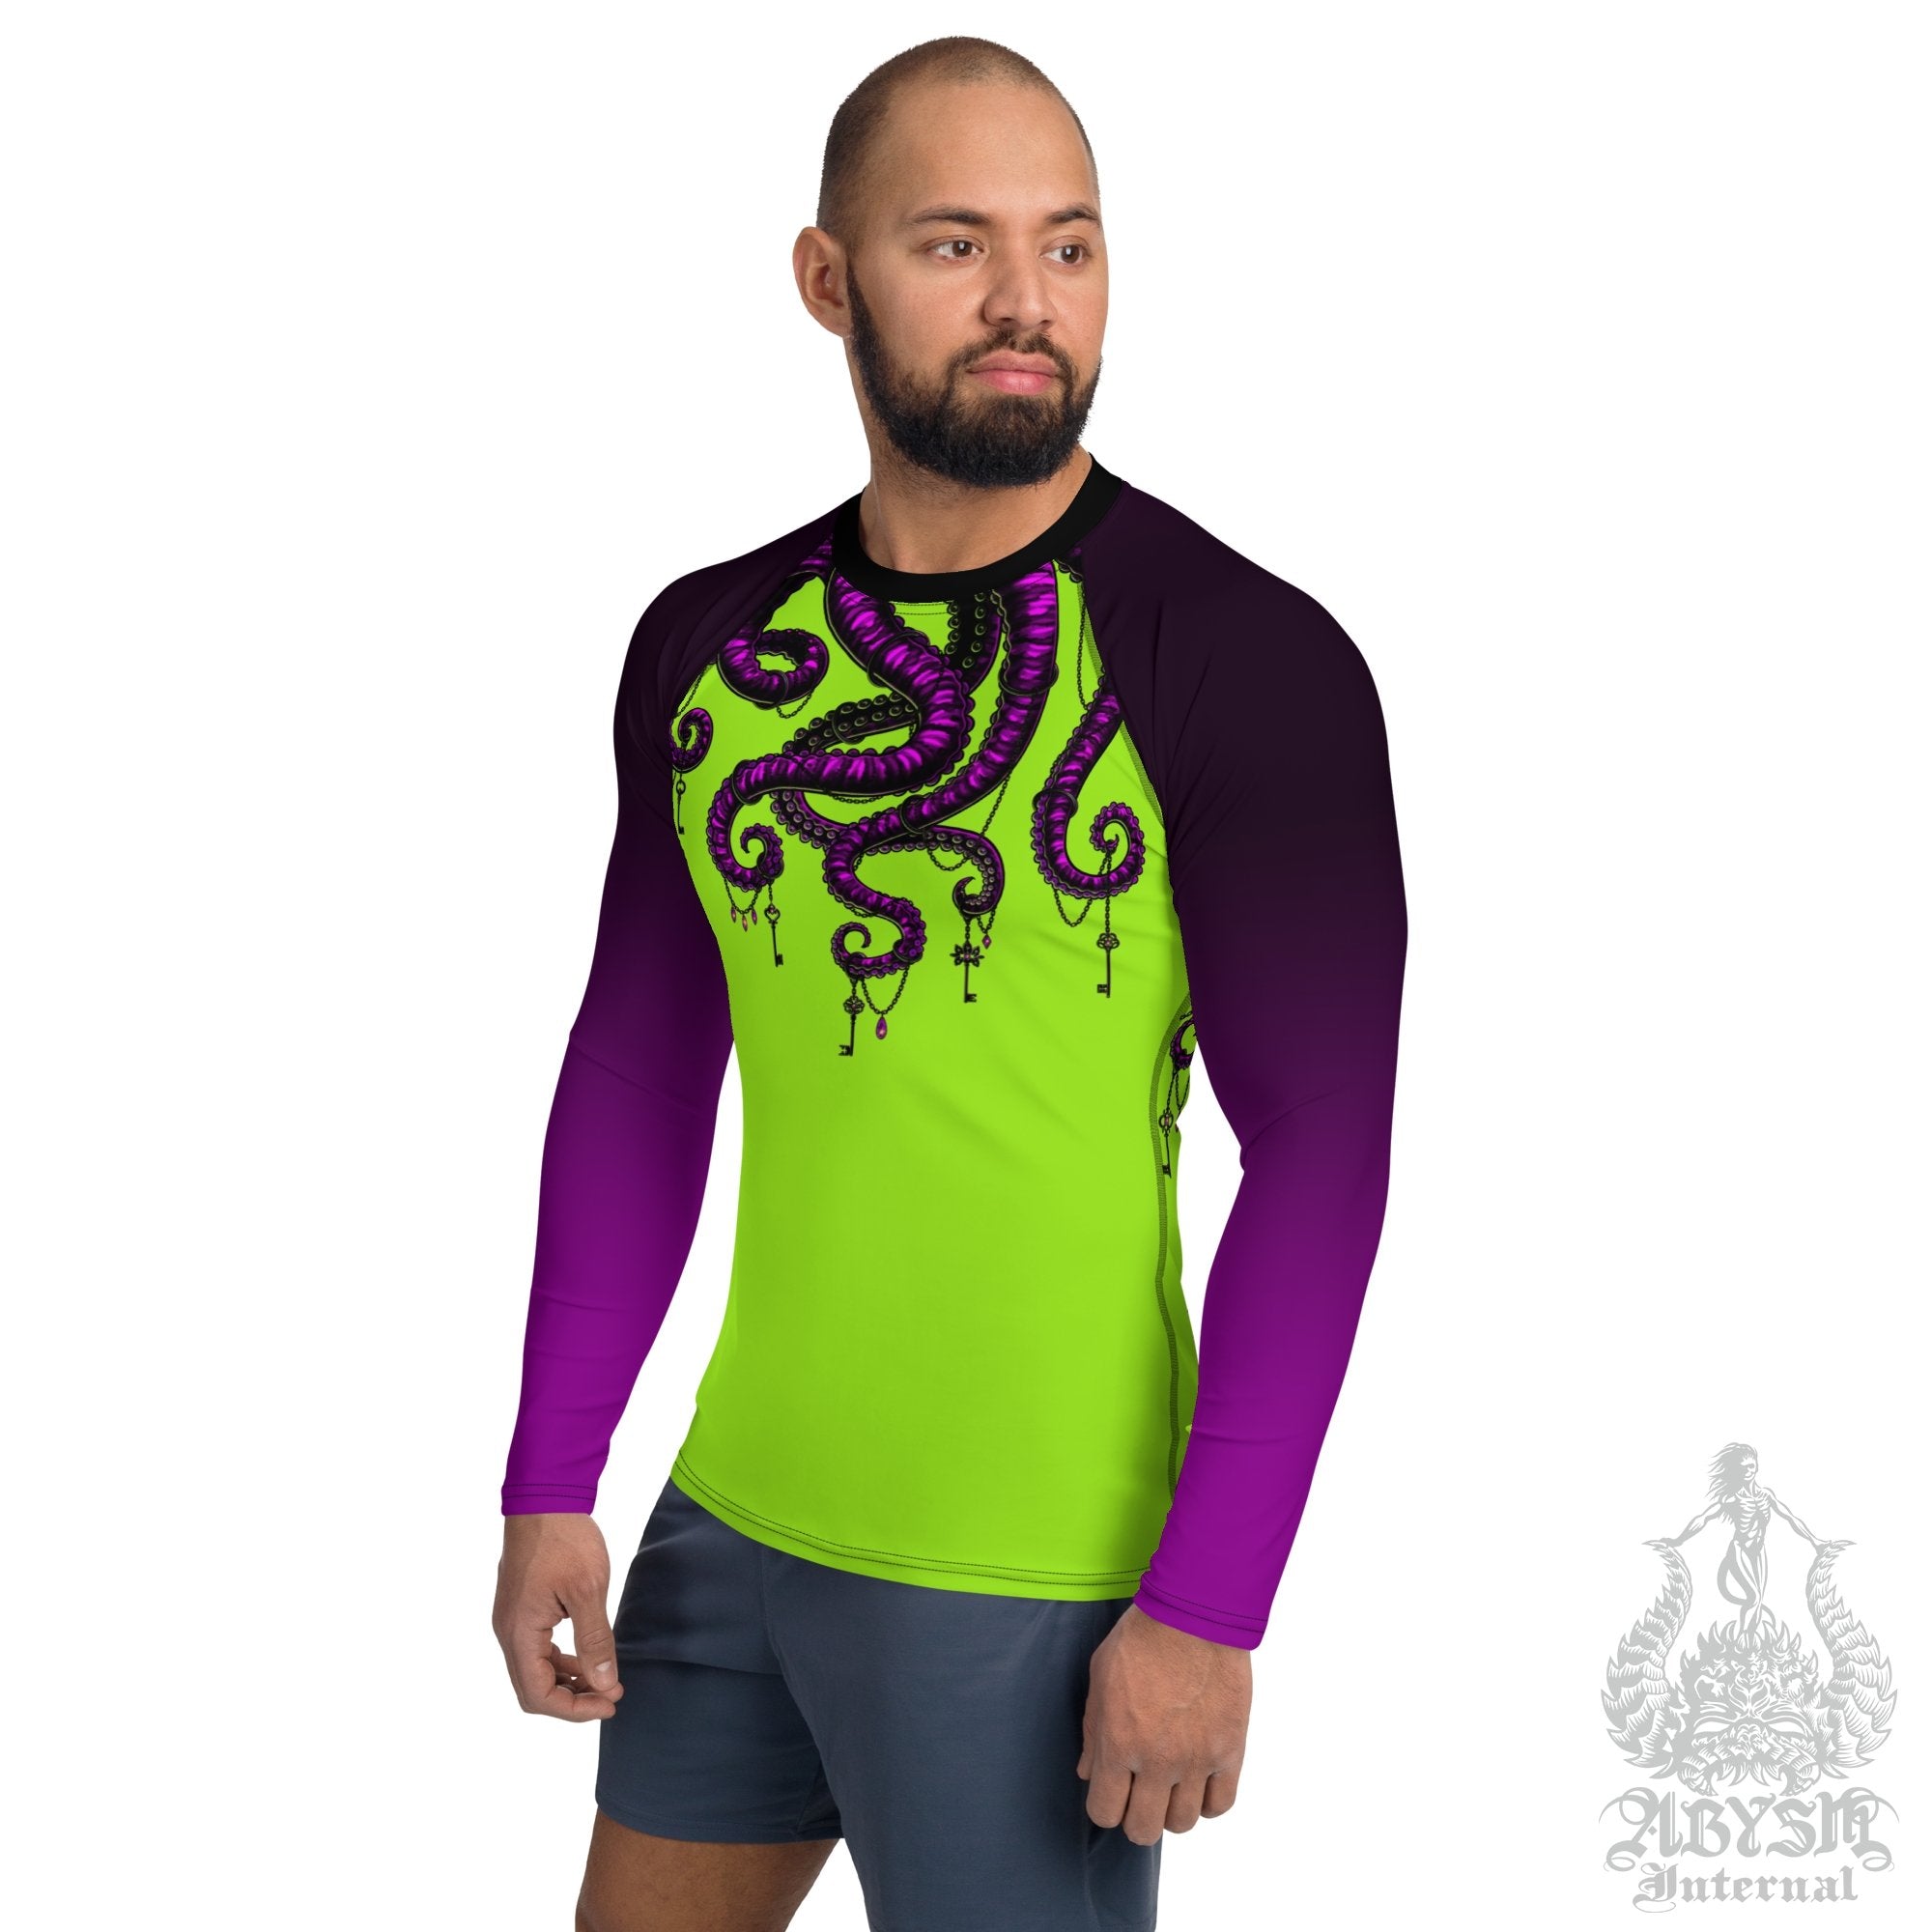 Green and Purple Men's Rash Guard, Long Sleeve spandex shirt for surfing, swimwear top for water sports - Octopus - Abysm Internal